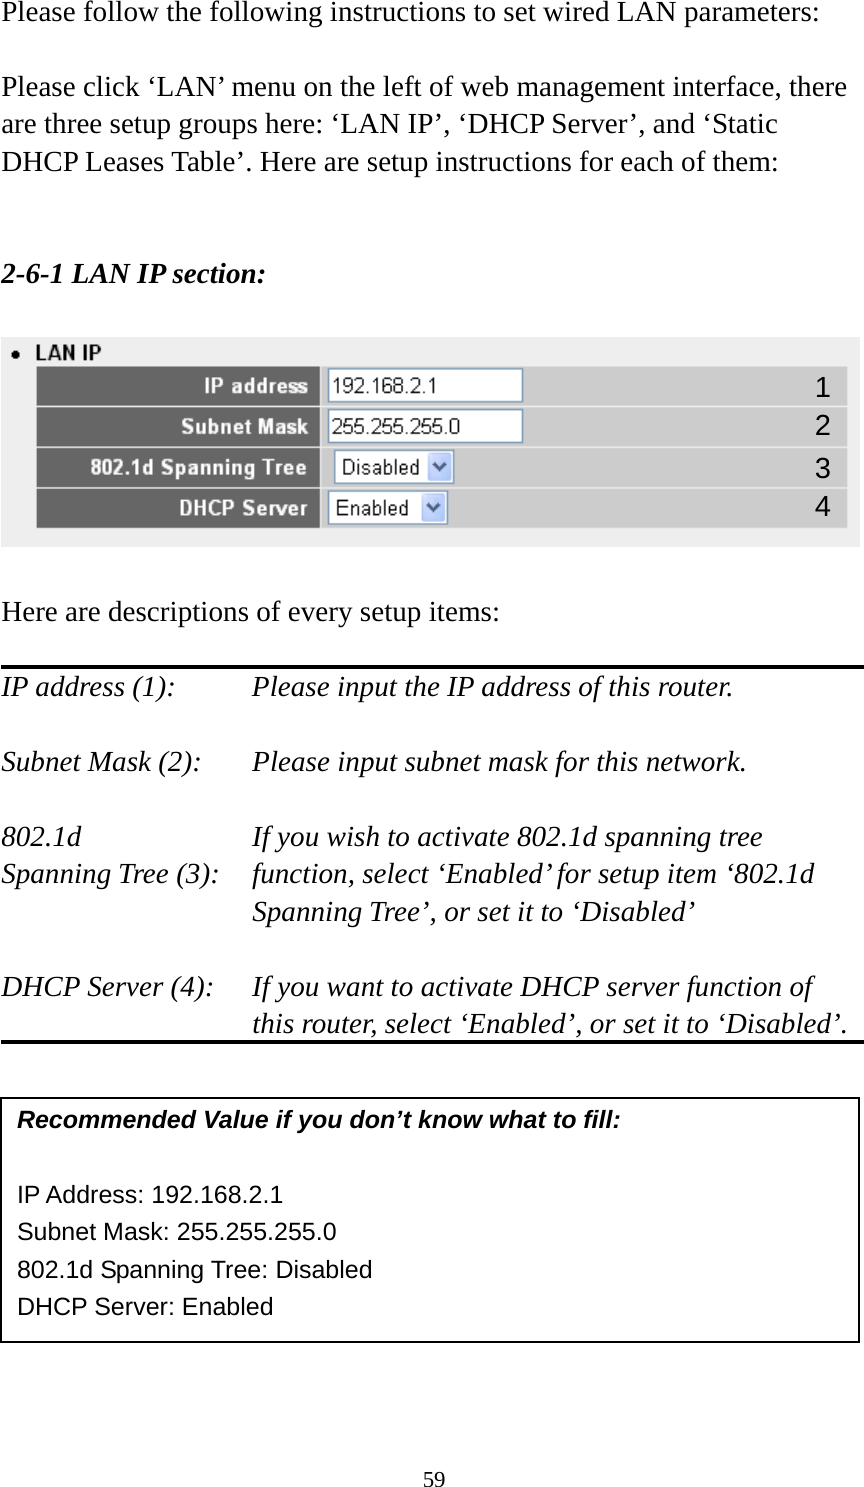 59 Please follow the following instructions to set wired LAN parameters:  Please click ‘LAN’ menu on the left of web management interface, there are three setup groups here: ‘LAN IP’, ‘DHCP Server’, and ‘Static DHCP Leases Table’. Here are setup instructions for each of them:   2-6-1 LAN IP section:    Here are descriptions of every setup items:  IP address (1):     Please input the IP address of this router.  Subnet Mask (2):    Please input subnet mask for this network.  802.1d         If you wish to activate 802.1d spanning tree Spanning Tree (3):    function, select ‘Enabled’ for setup item ‘802.1d Spanning Tree’, or set it to ‘Disabled’  DHCP Server (4):  If you want to activate DHCP server function of this router, select ‘Enabled’, or set it to ‘Disabled’.            Recommended Value if you don’t know what to fill:  IP Address: 192.168.2.1 Subnet Mask: 255.255.255.0 802.1d Spanning Tree: Disabled DHCP Server: Enabled 1 3 2 4 